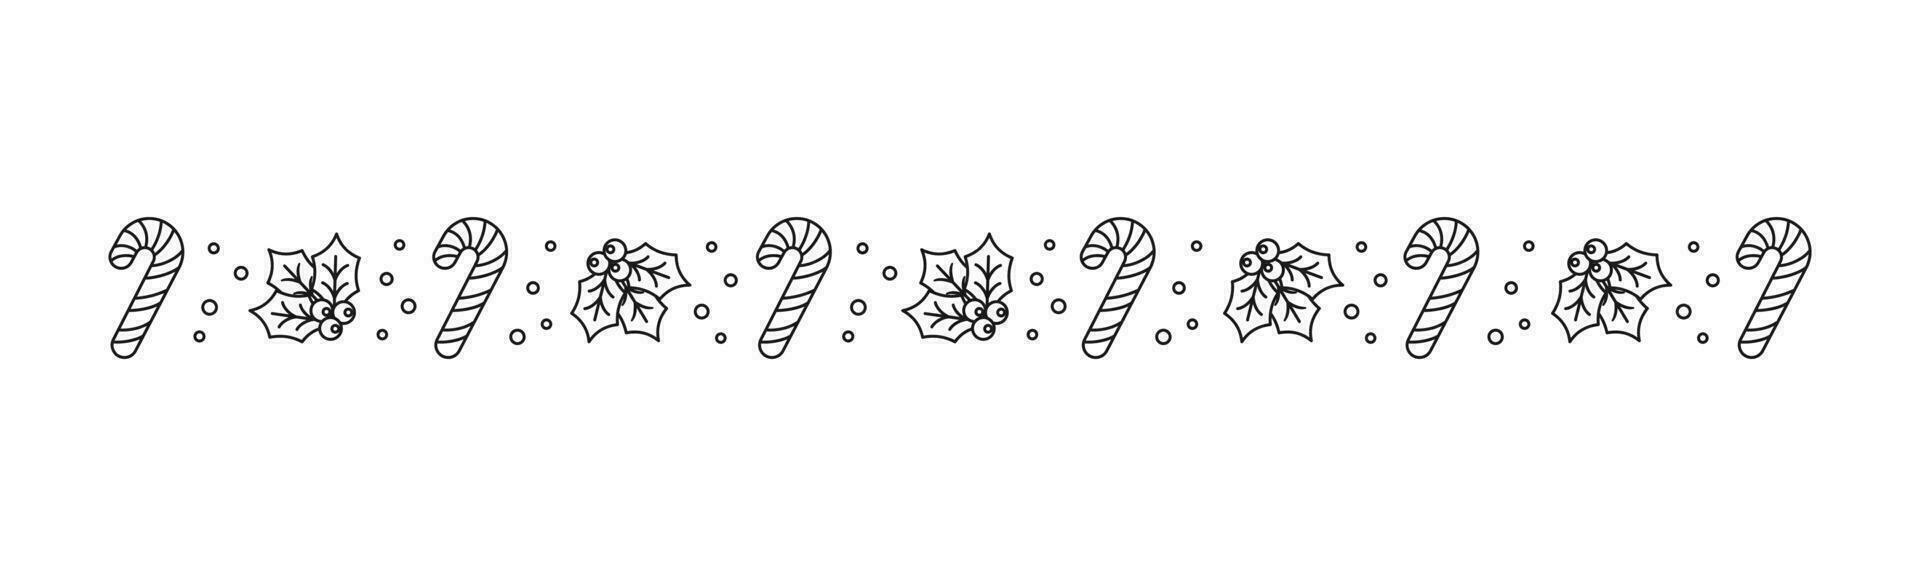 Christmas themed decorative border and text divider, Mistletoe and Candy Cane Pattern Outline Doodle. Vector Illustration.